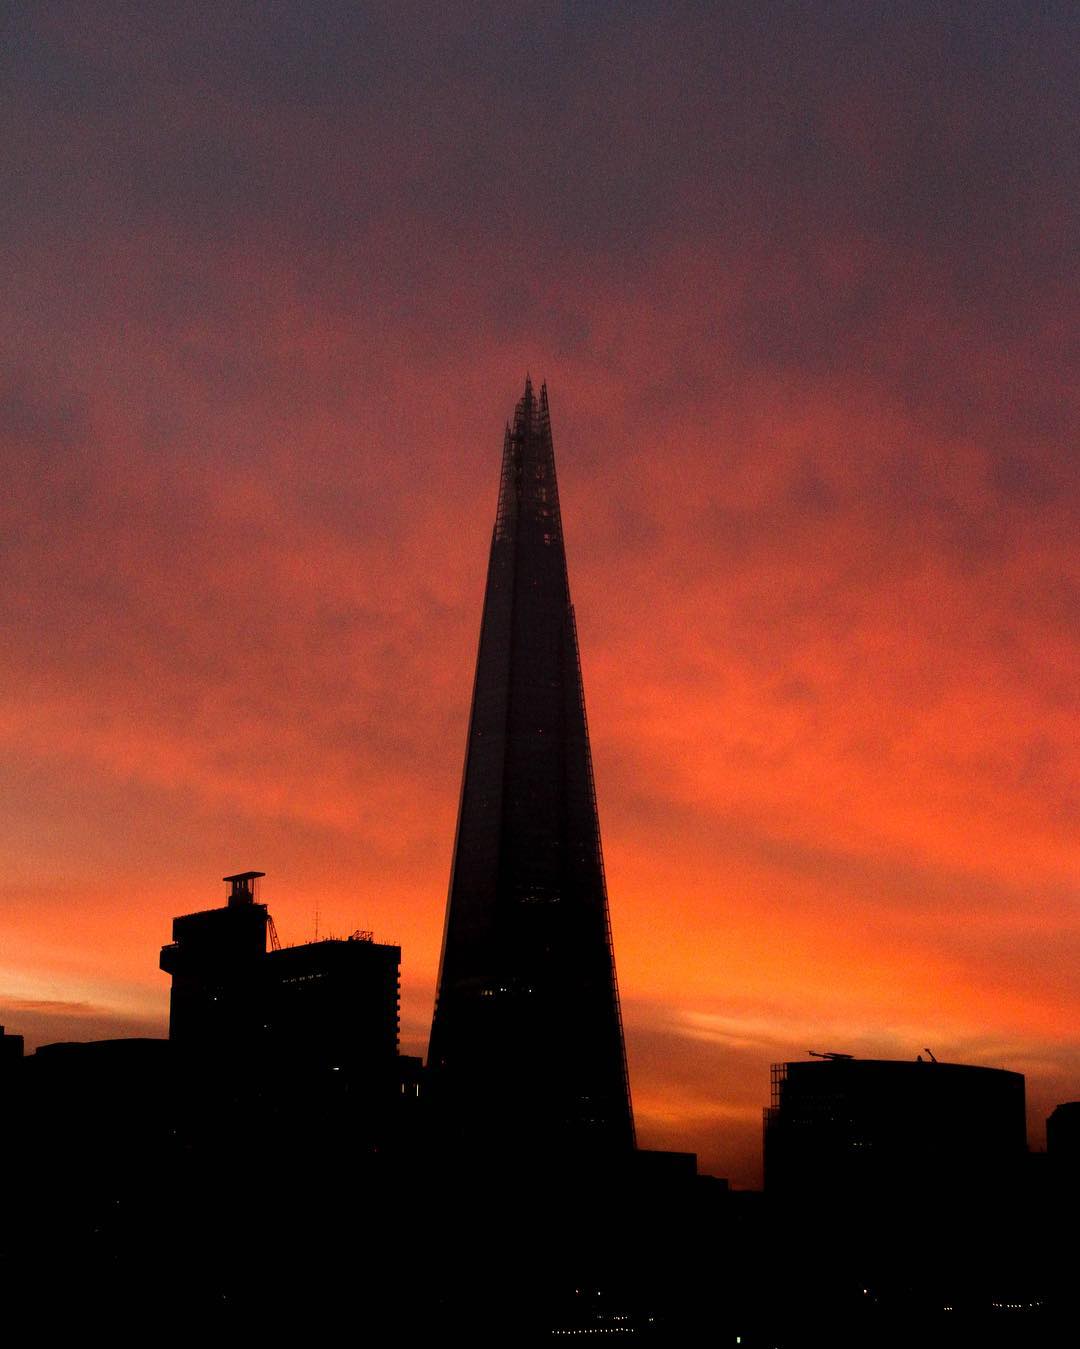 evening. one of 1000 pictures of the shard in my camera roll.